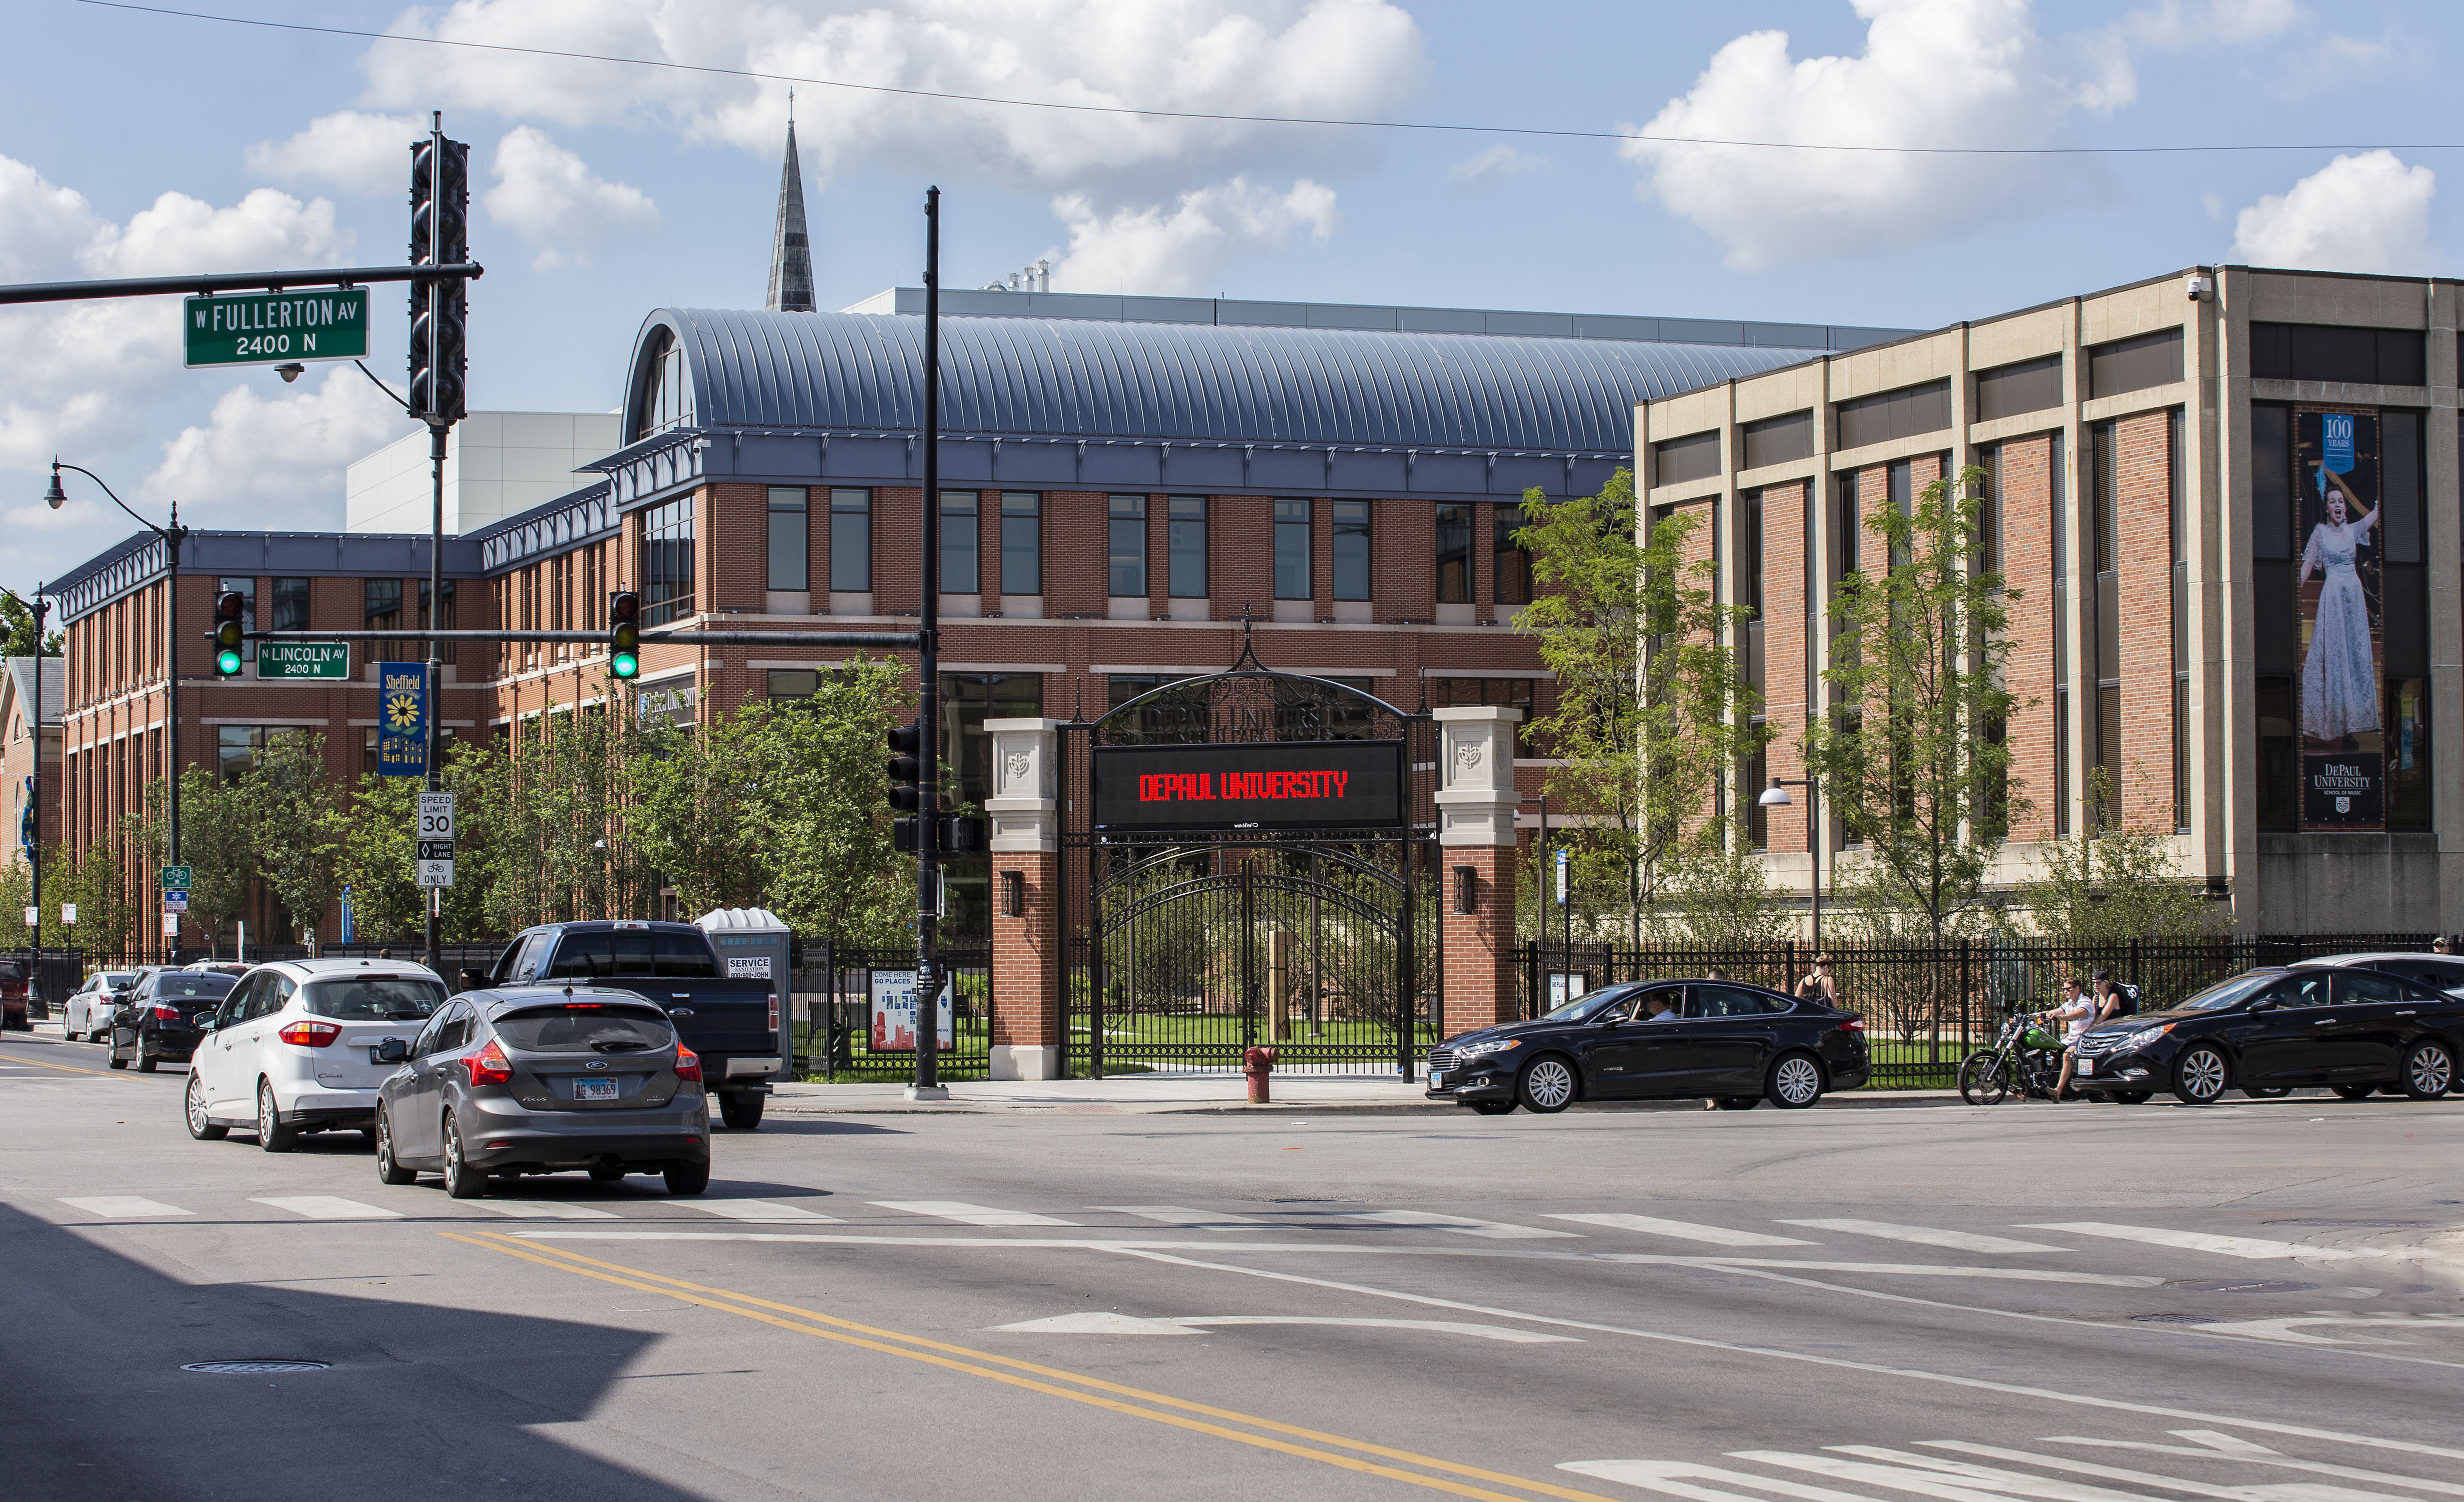 Street view of Gateway to DePaul University's Lincoln Park Campus